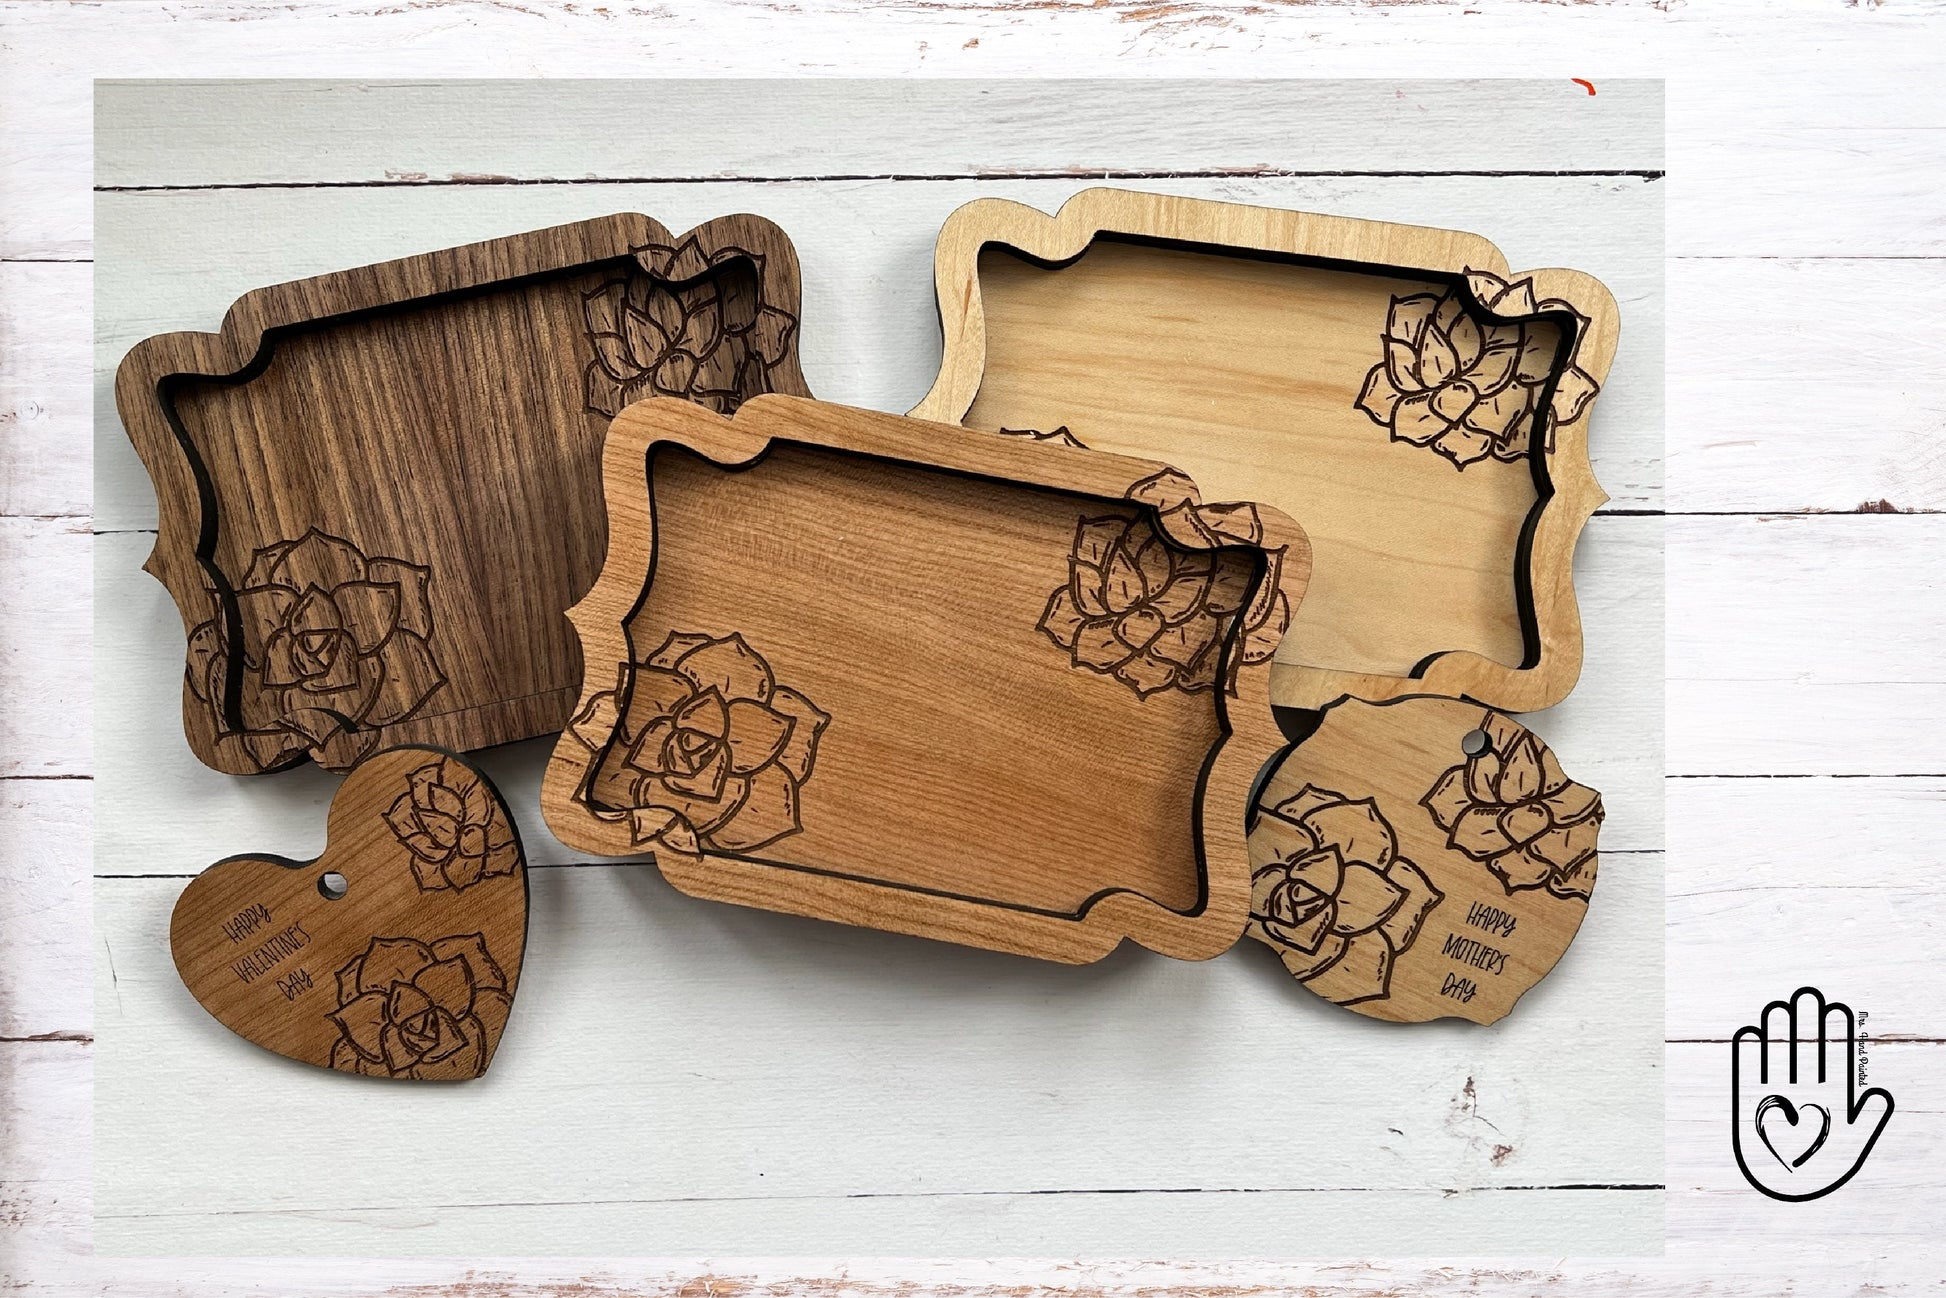 Succulent Engraved Wood Valet Trays and Trinket & Coin Dishes